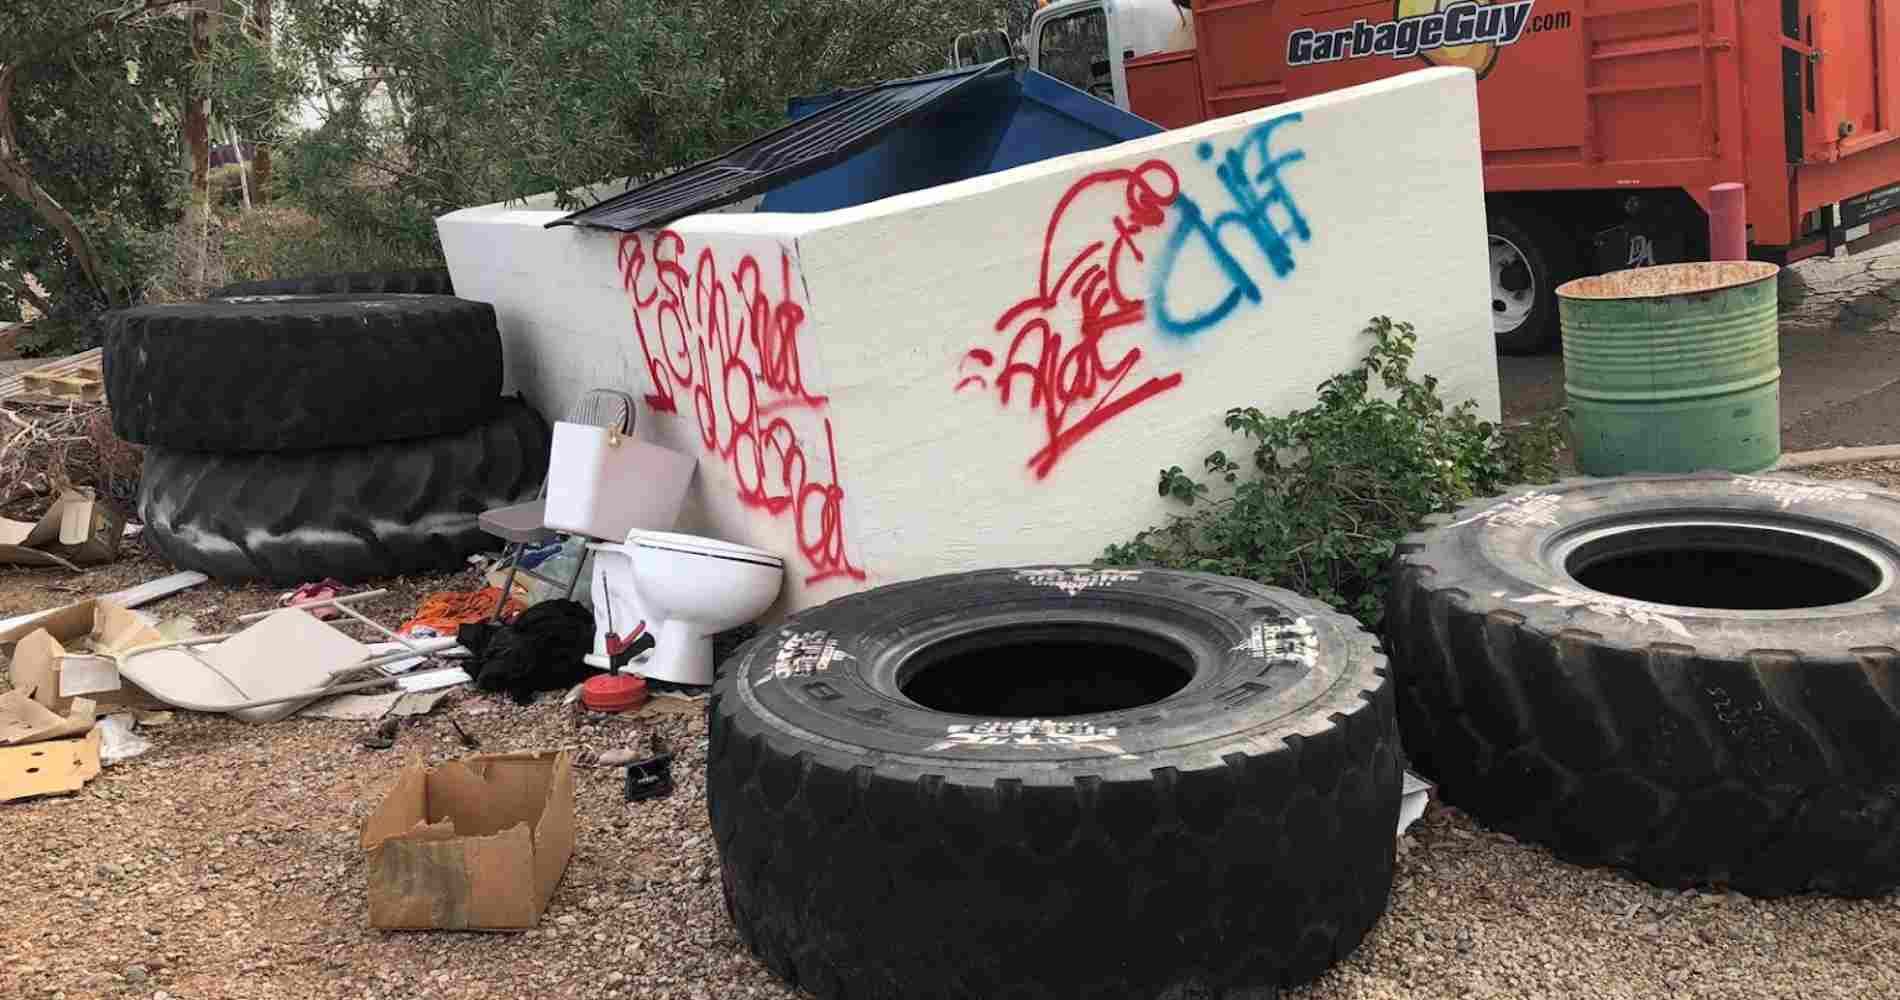 #1 for Tire Disposal in Fountain Hills, AZ with Over 1200 5-Star Reviews!